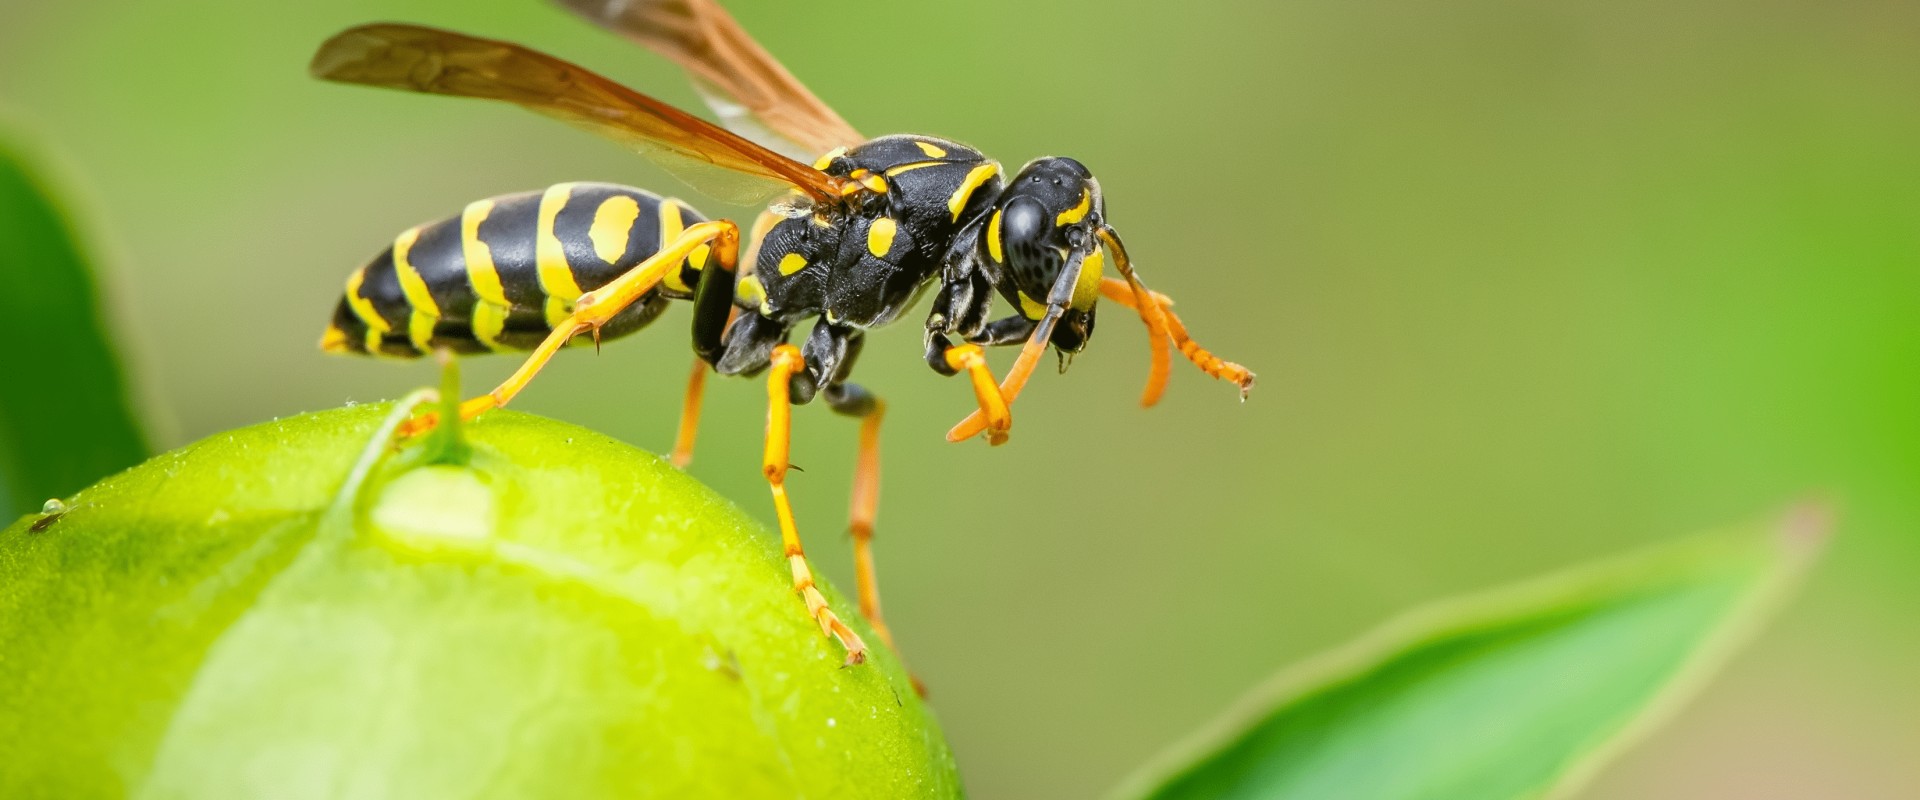 Understanding the Size and Shape of Wasps